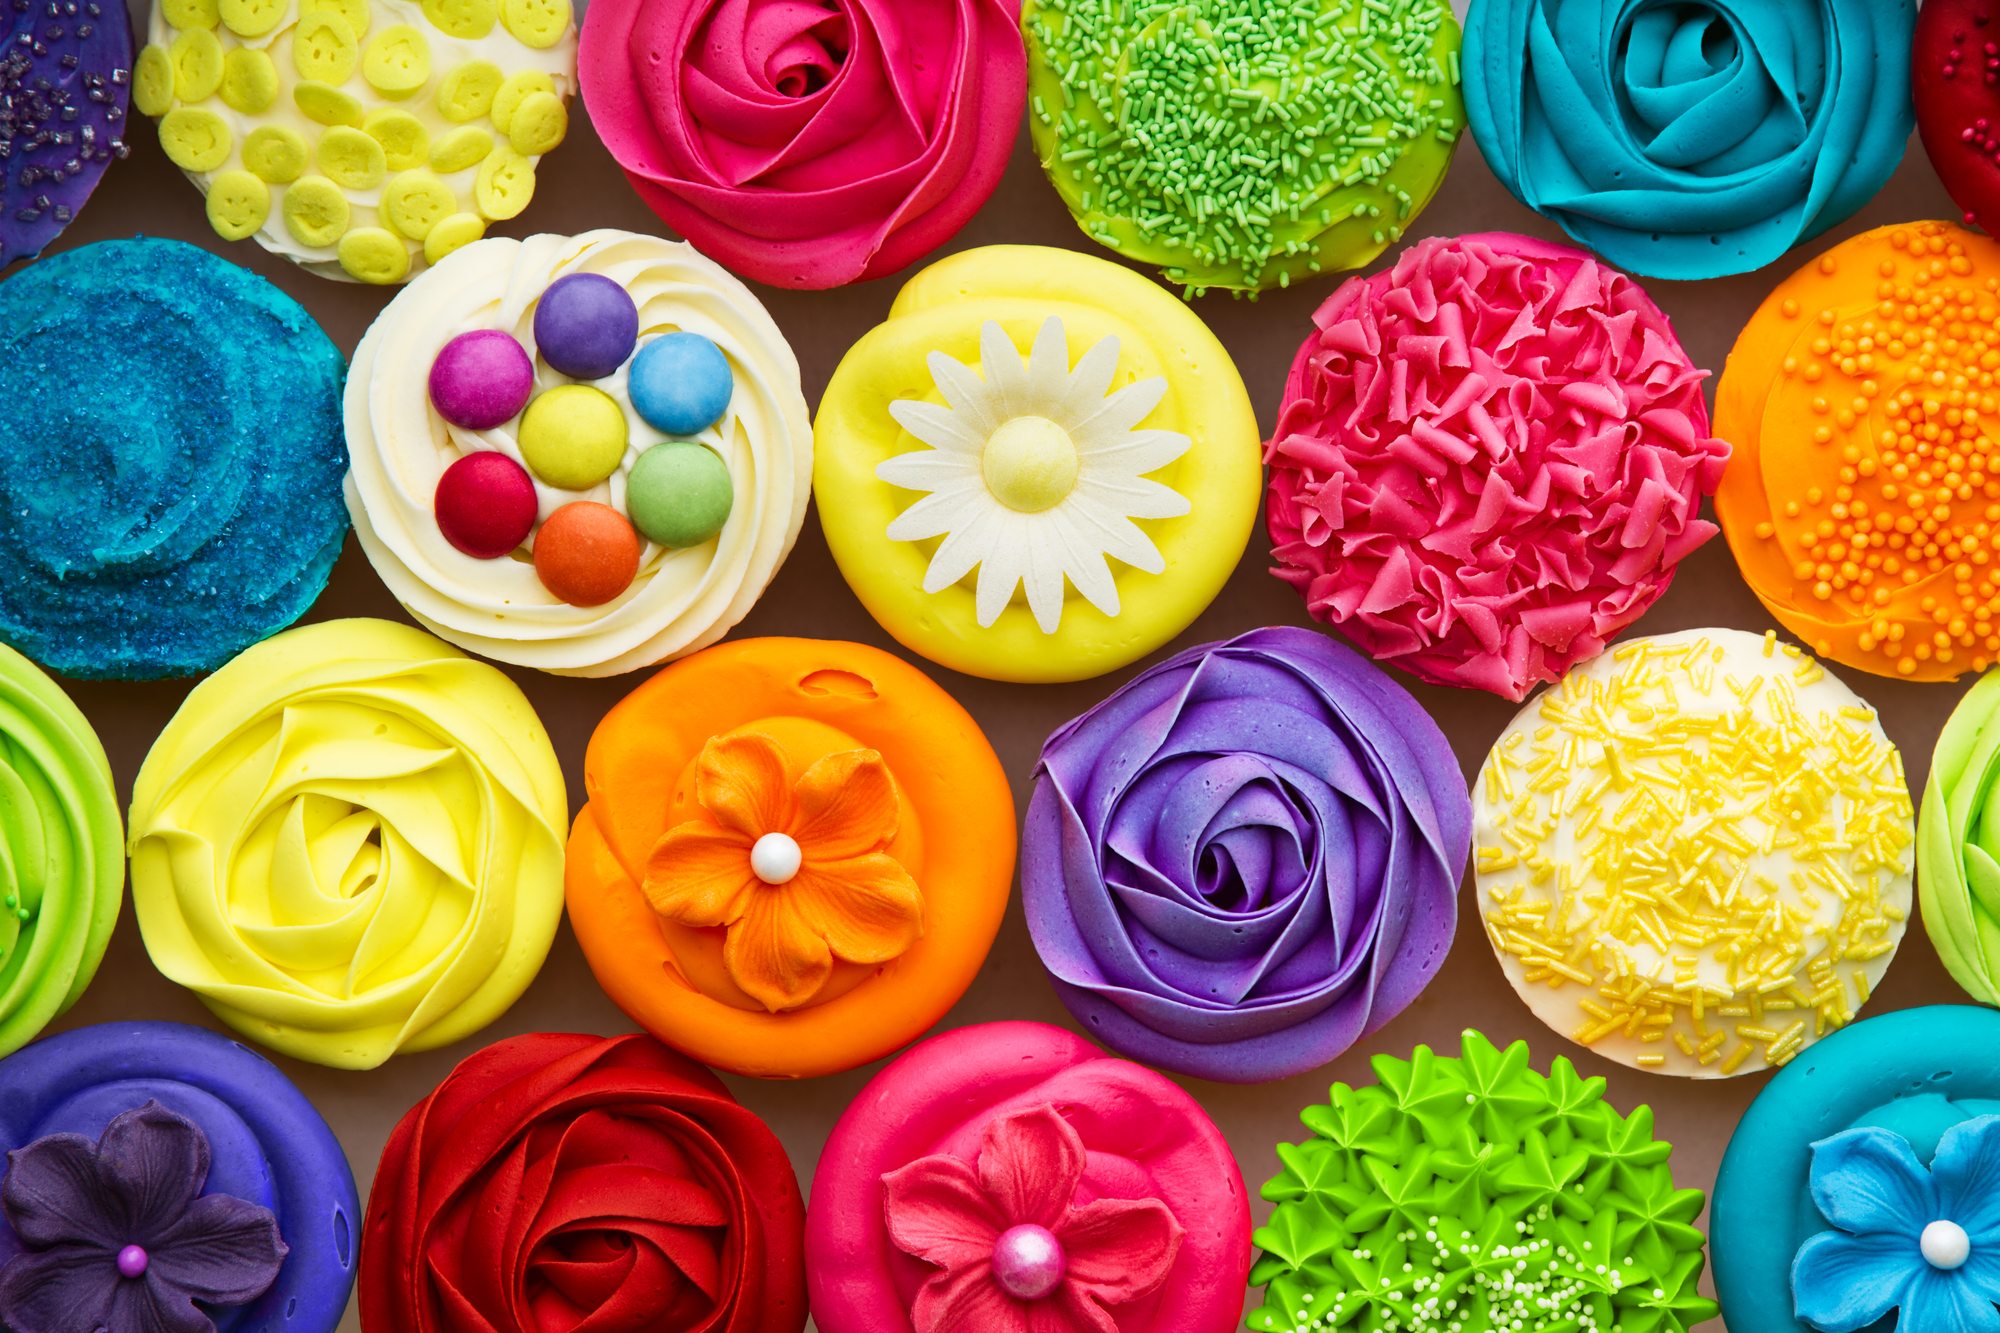 Array of colorful cupcakes